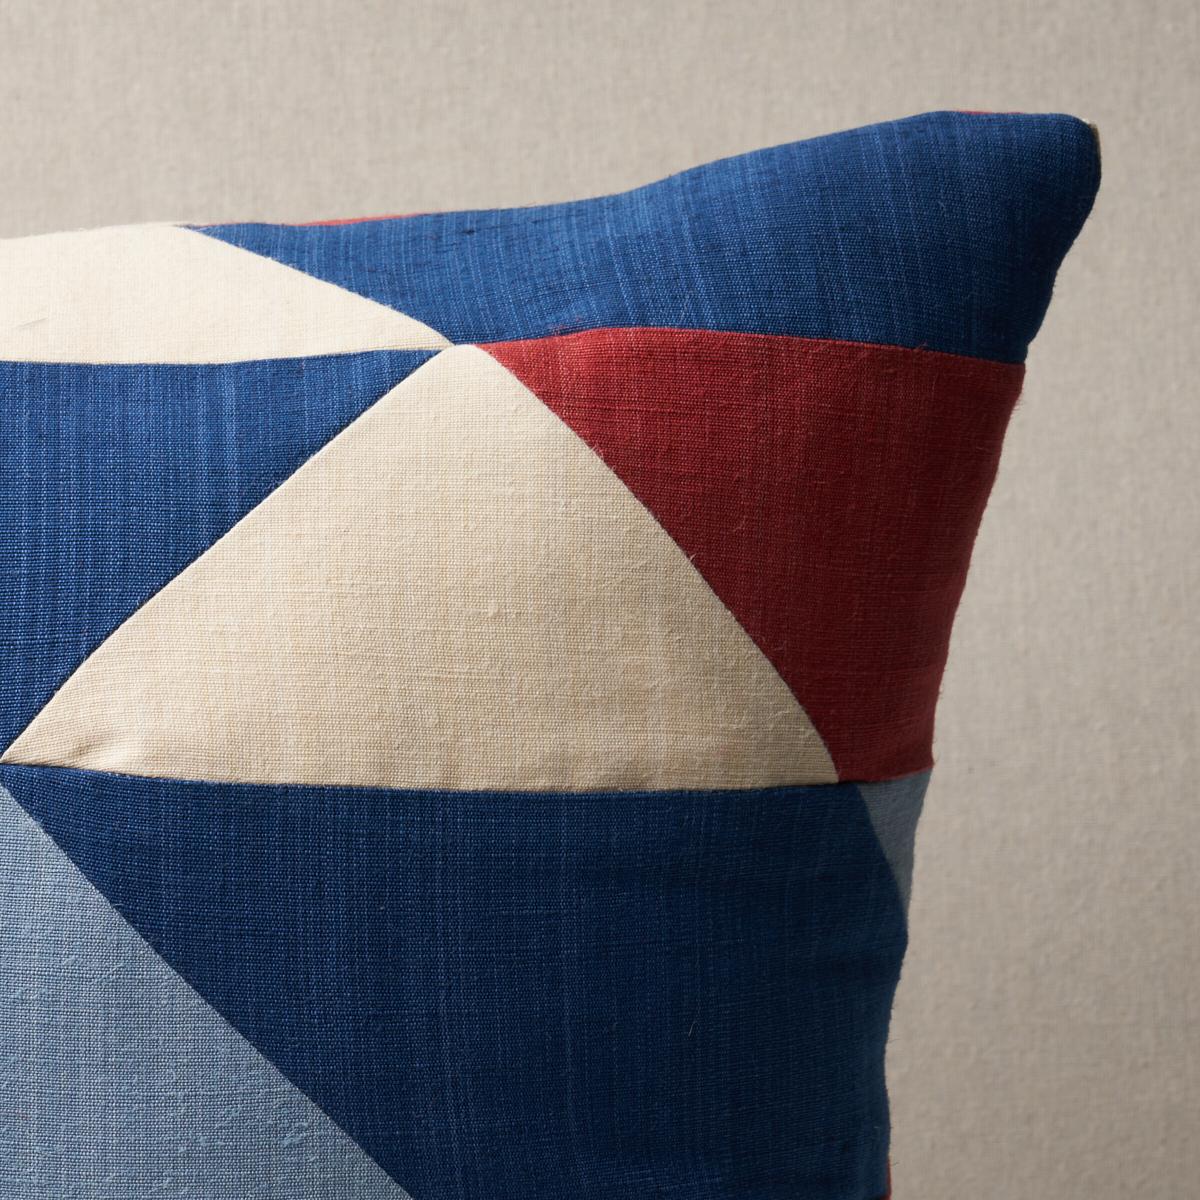 This pillow features Erindale with a knife edge finish. The perfect marriage of modern and rustic, Erindale in Americana is a striking patchwork made of hand-dyed cotton-jute. Pillow includes a feather/down fill insert and hidden zipper closure. *If